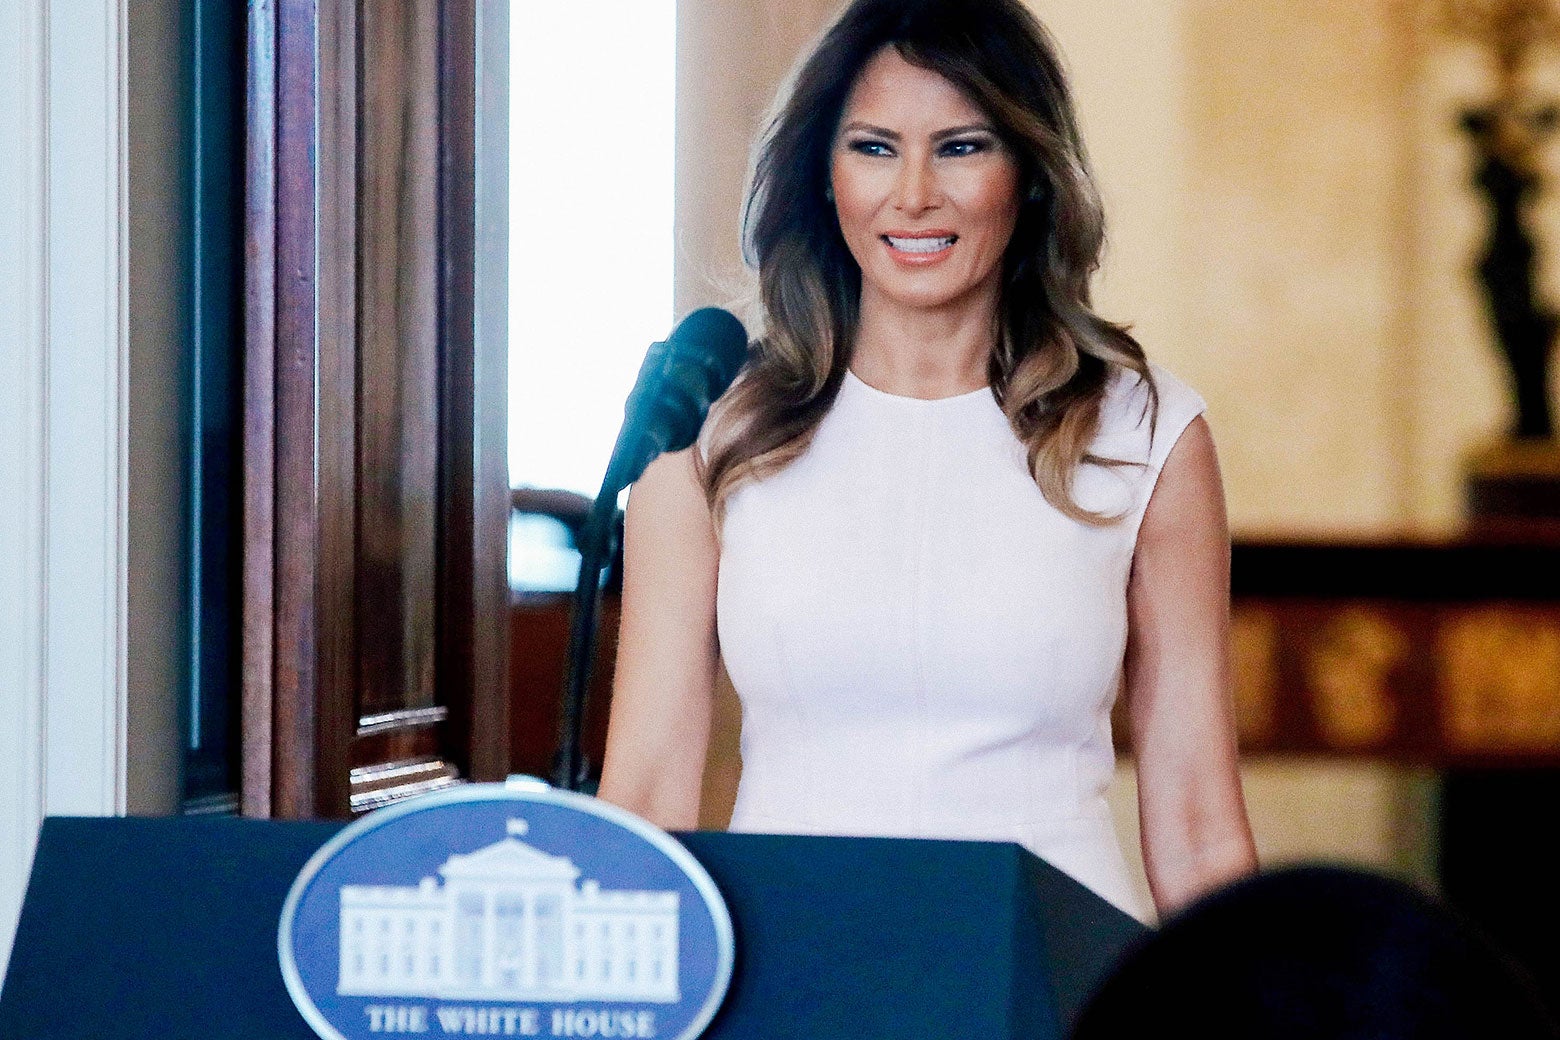 First lady Melania Trump walks into the Blue Room to speak at a luncheon for governors’ spouses at the White House on Feb. 26 in Washington.